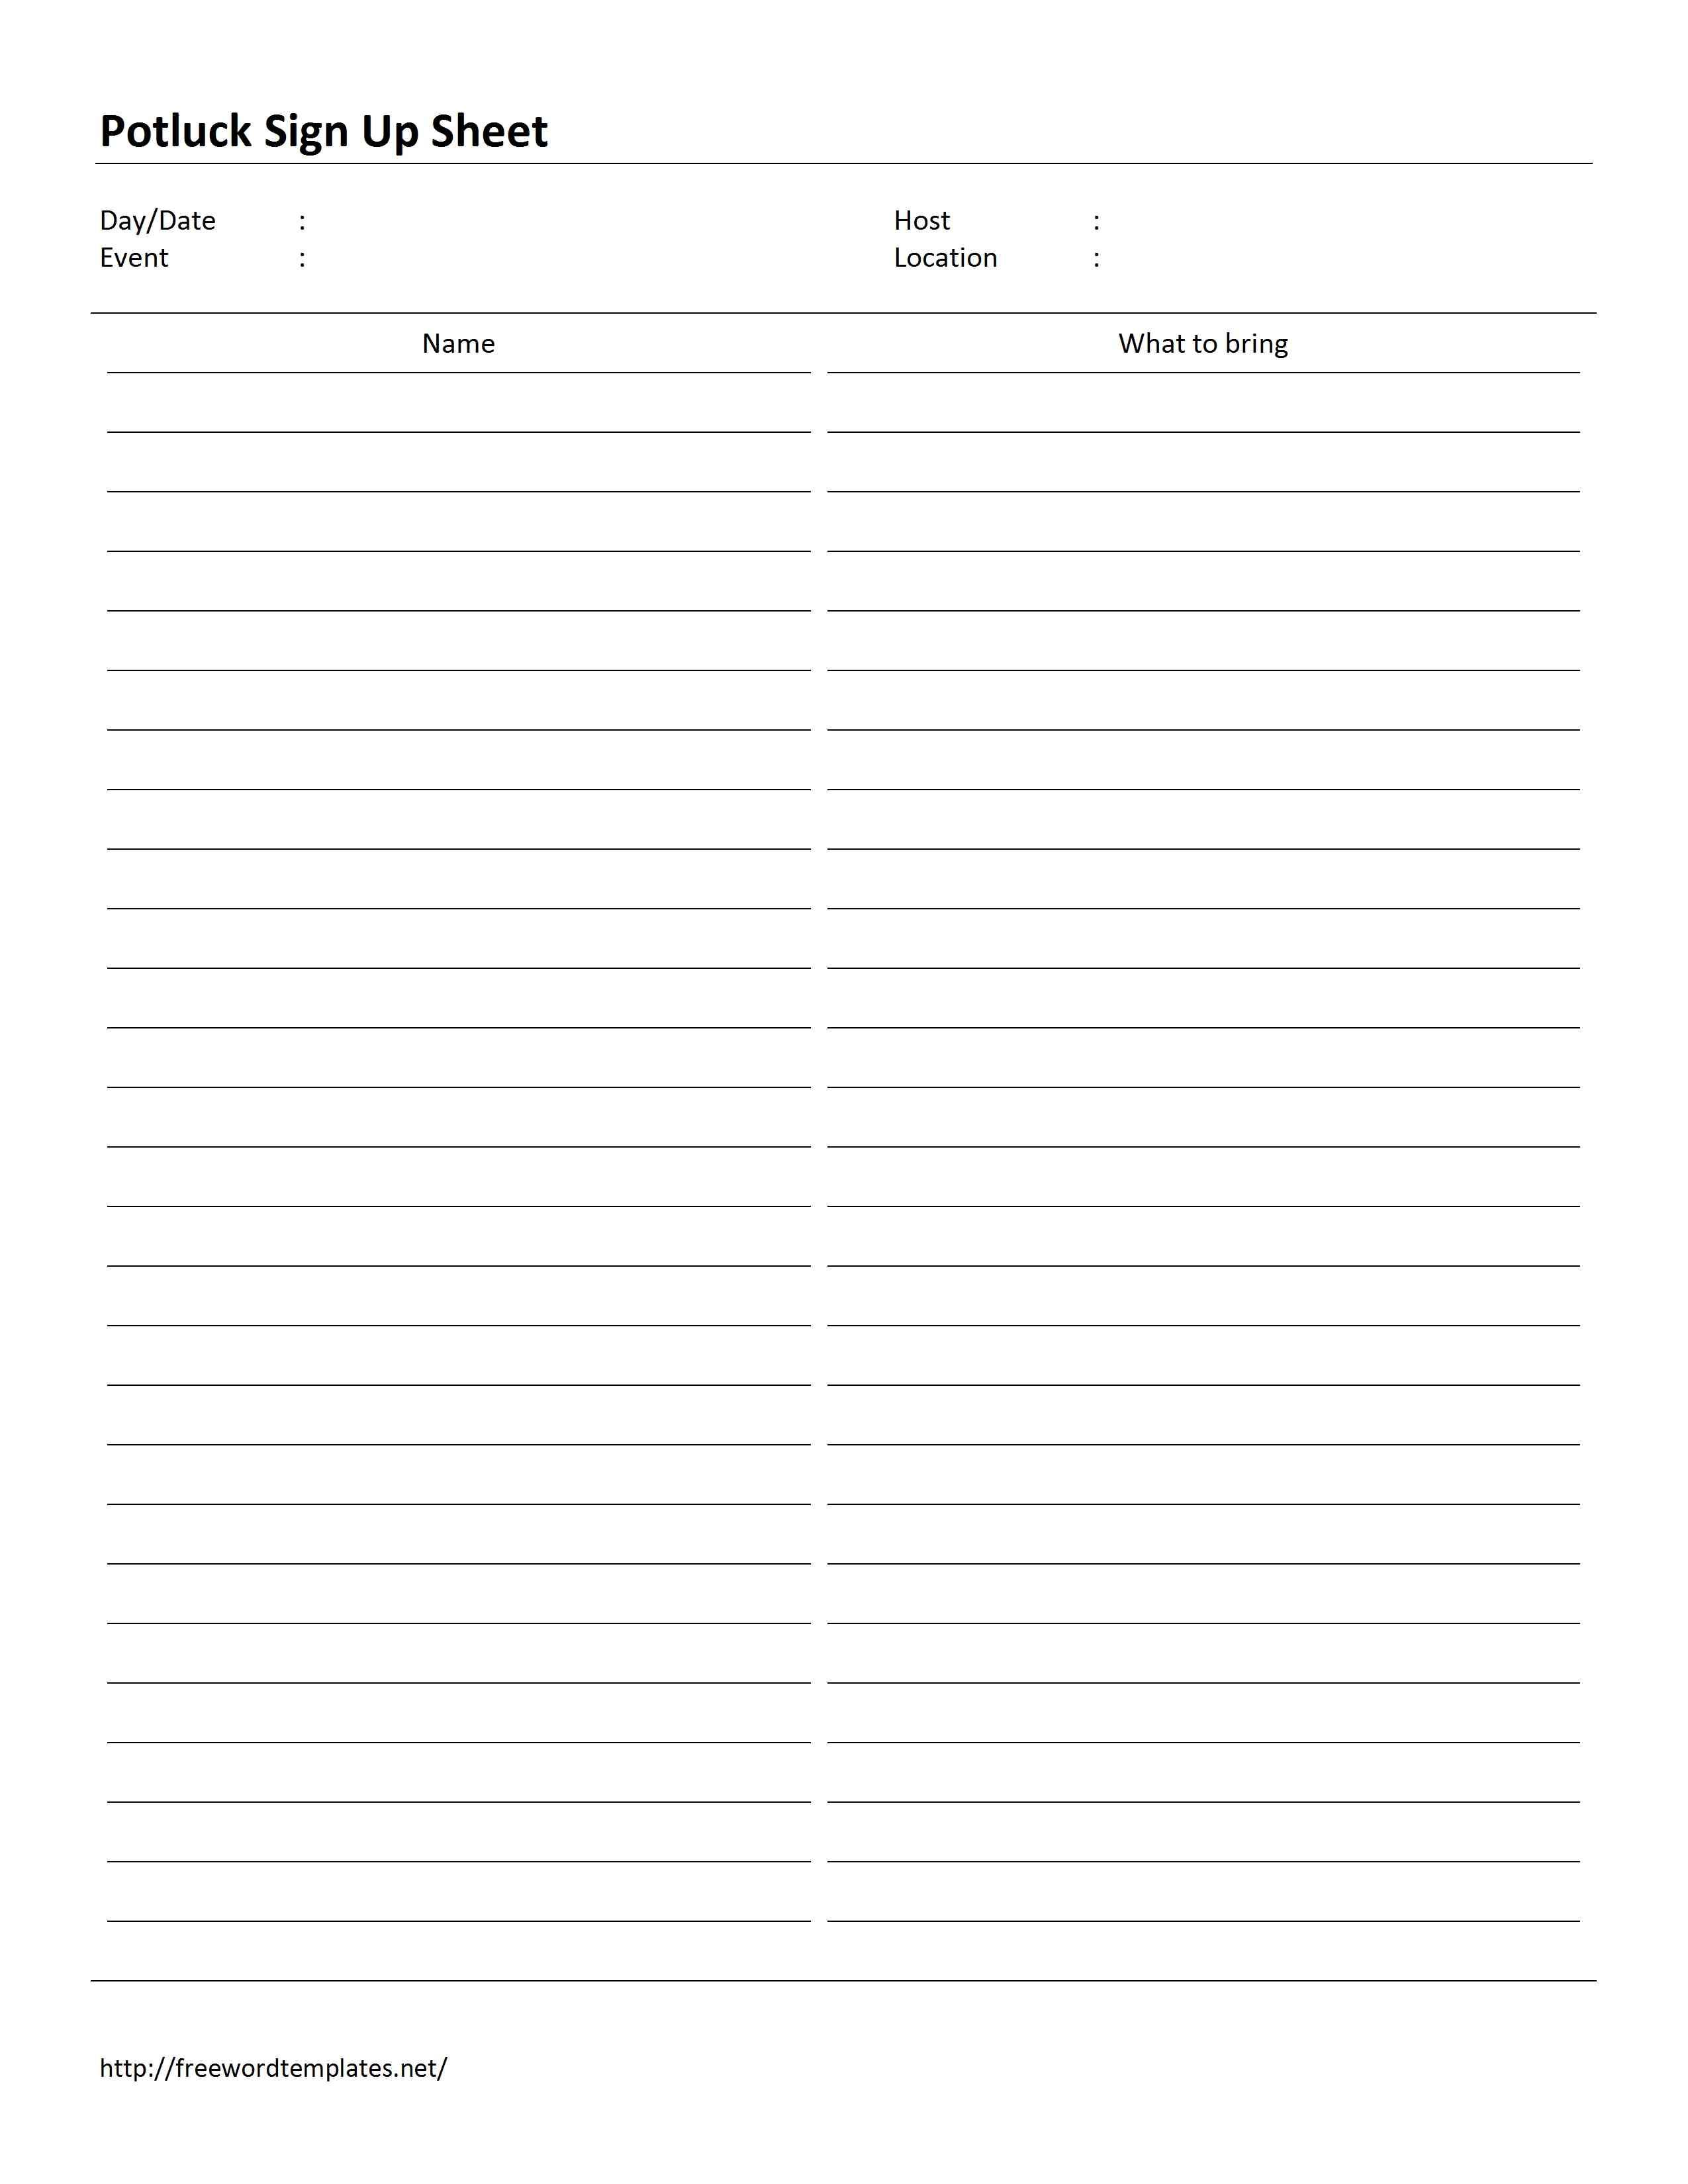 Pinchris Smith On Grandmachrisee's | Sign Up Sheets With Regard To Potluck Signup Sheet Template Word